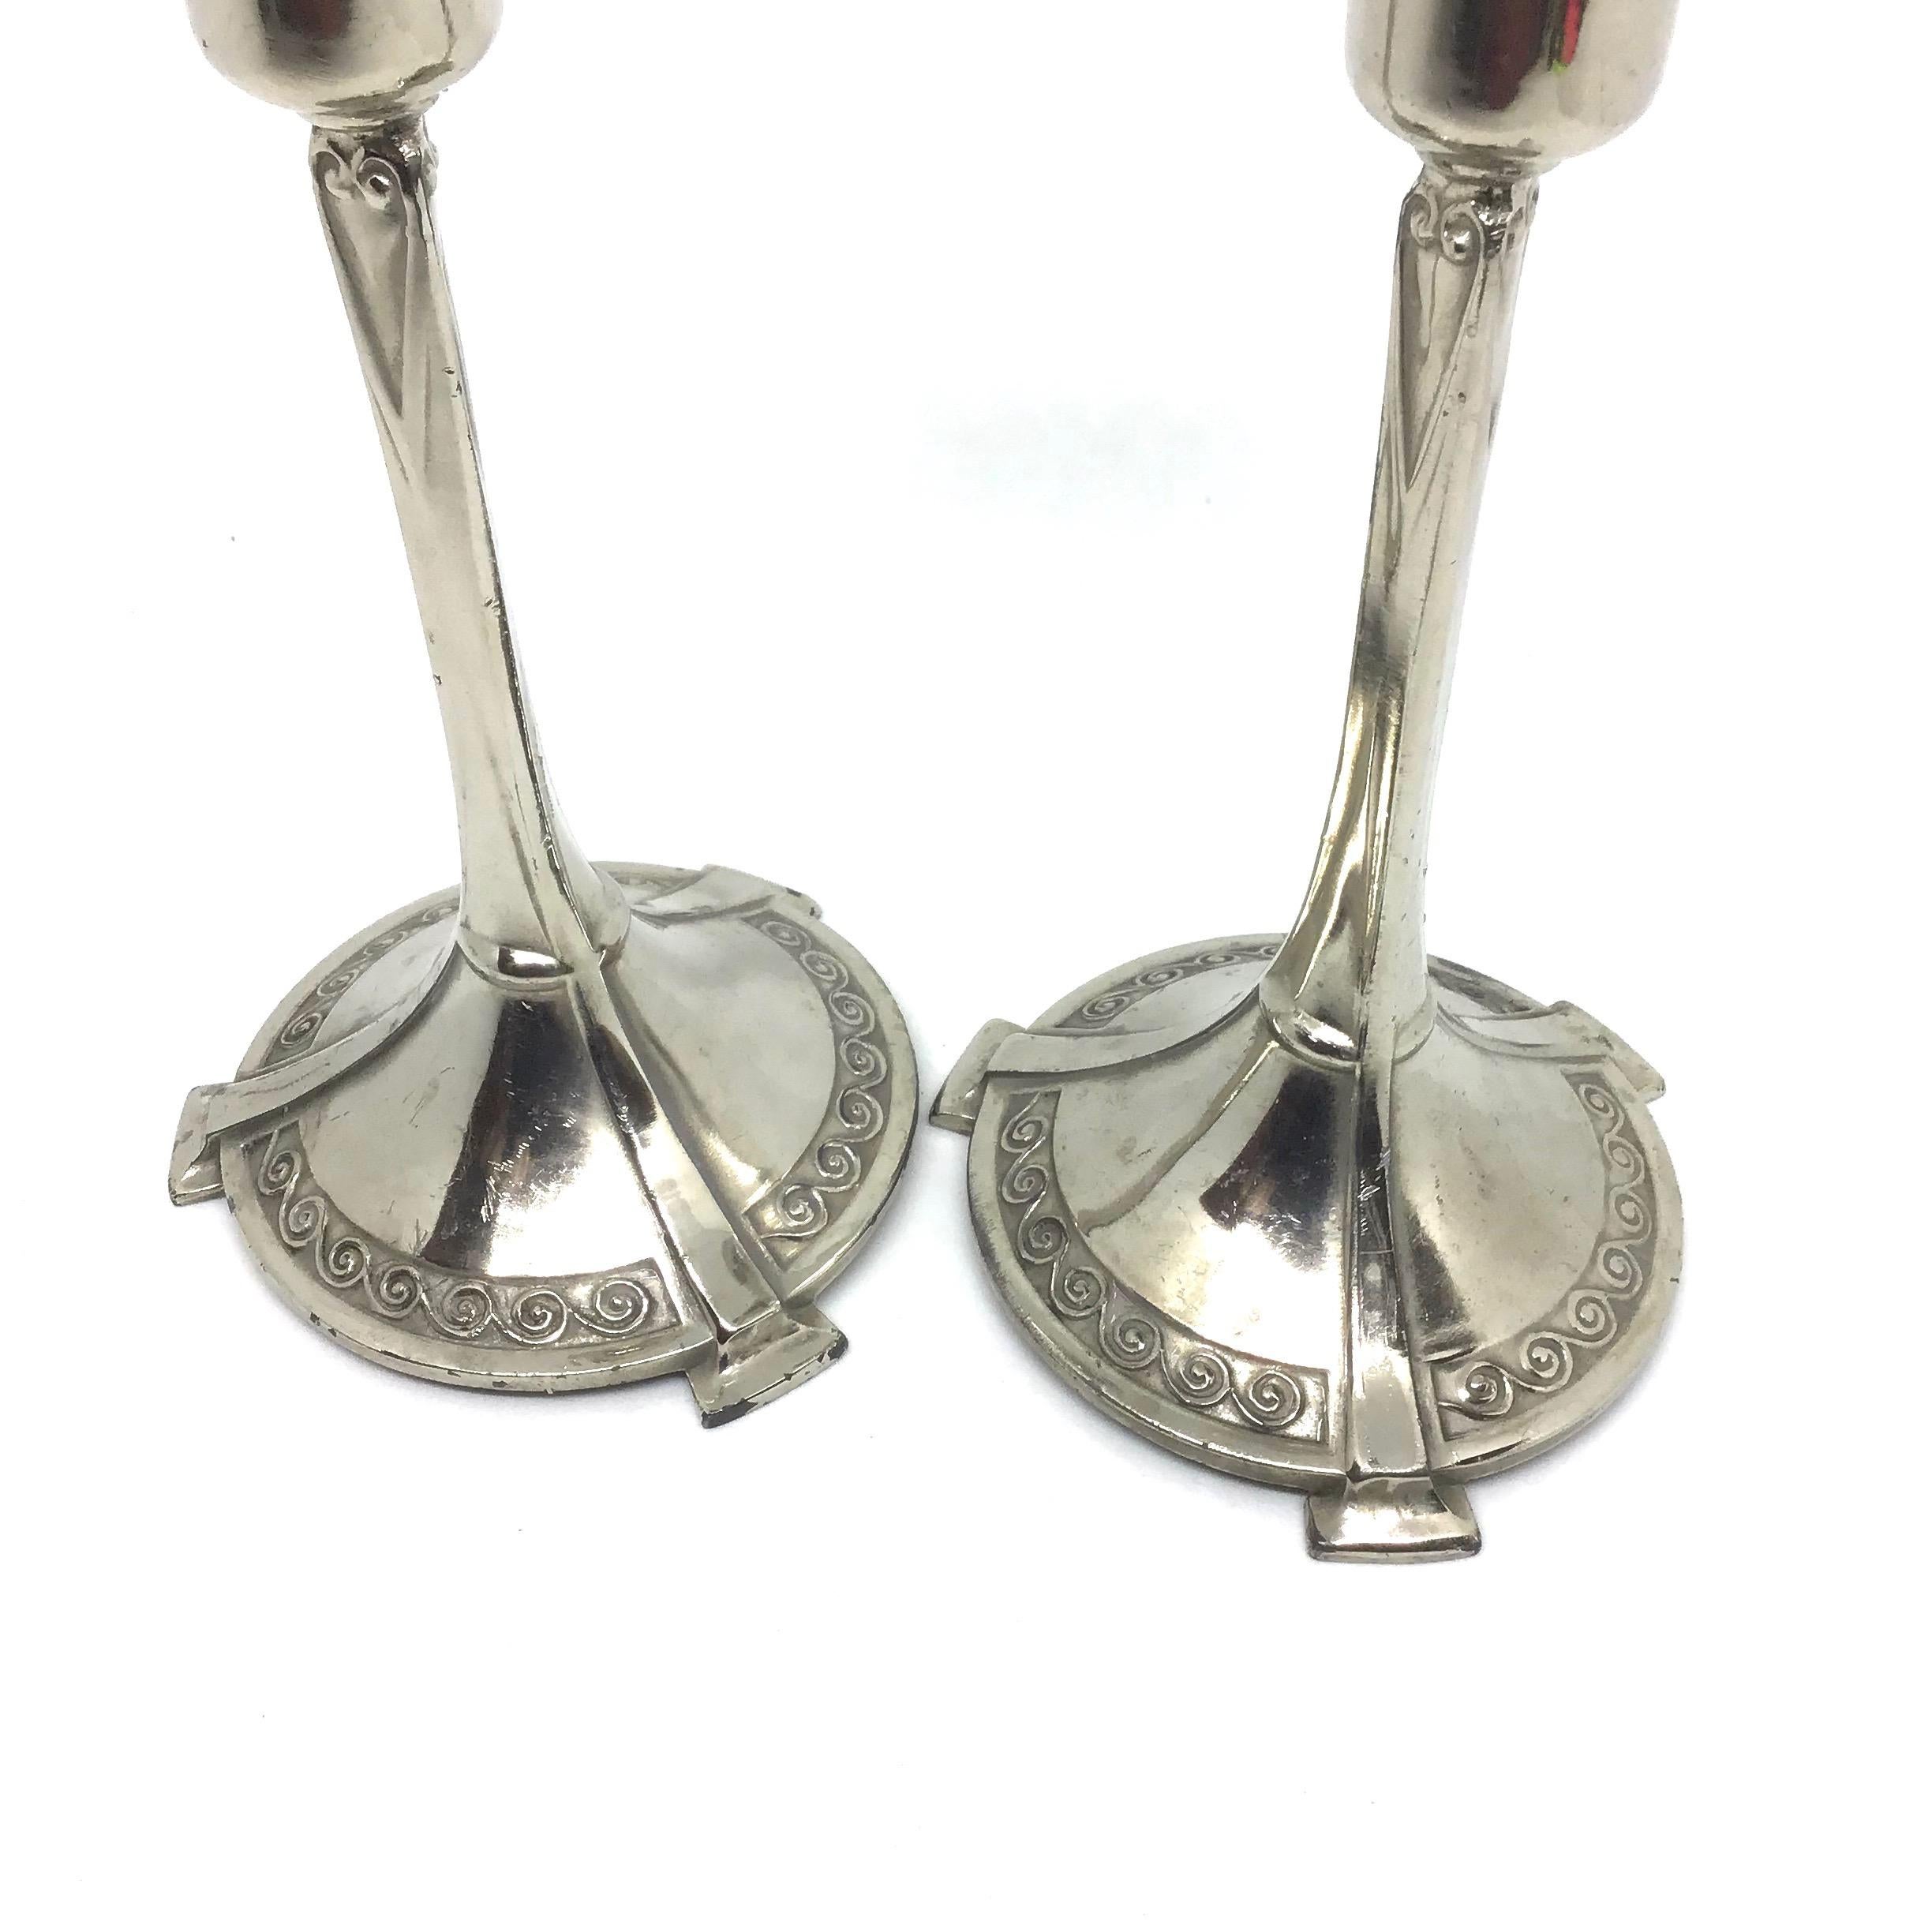 Pair of Art Nouveau Candlesticks Candleholders Antique, German, 1900s In Good Condition For Sale In Nuernberg, DE